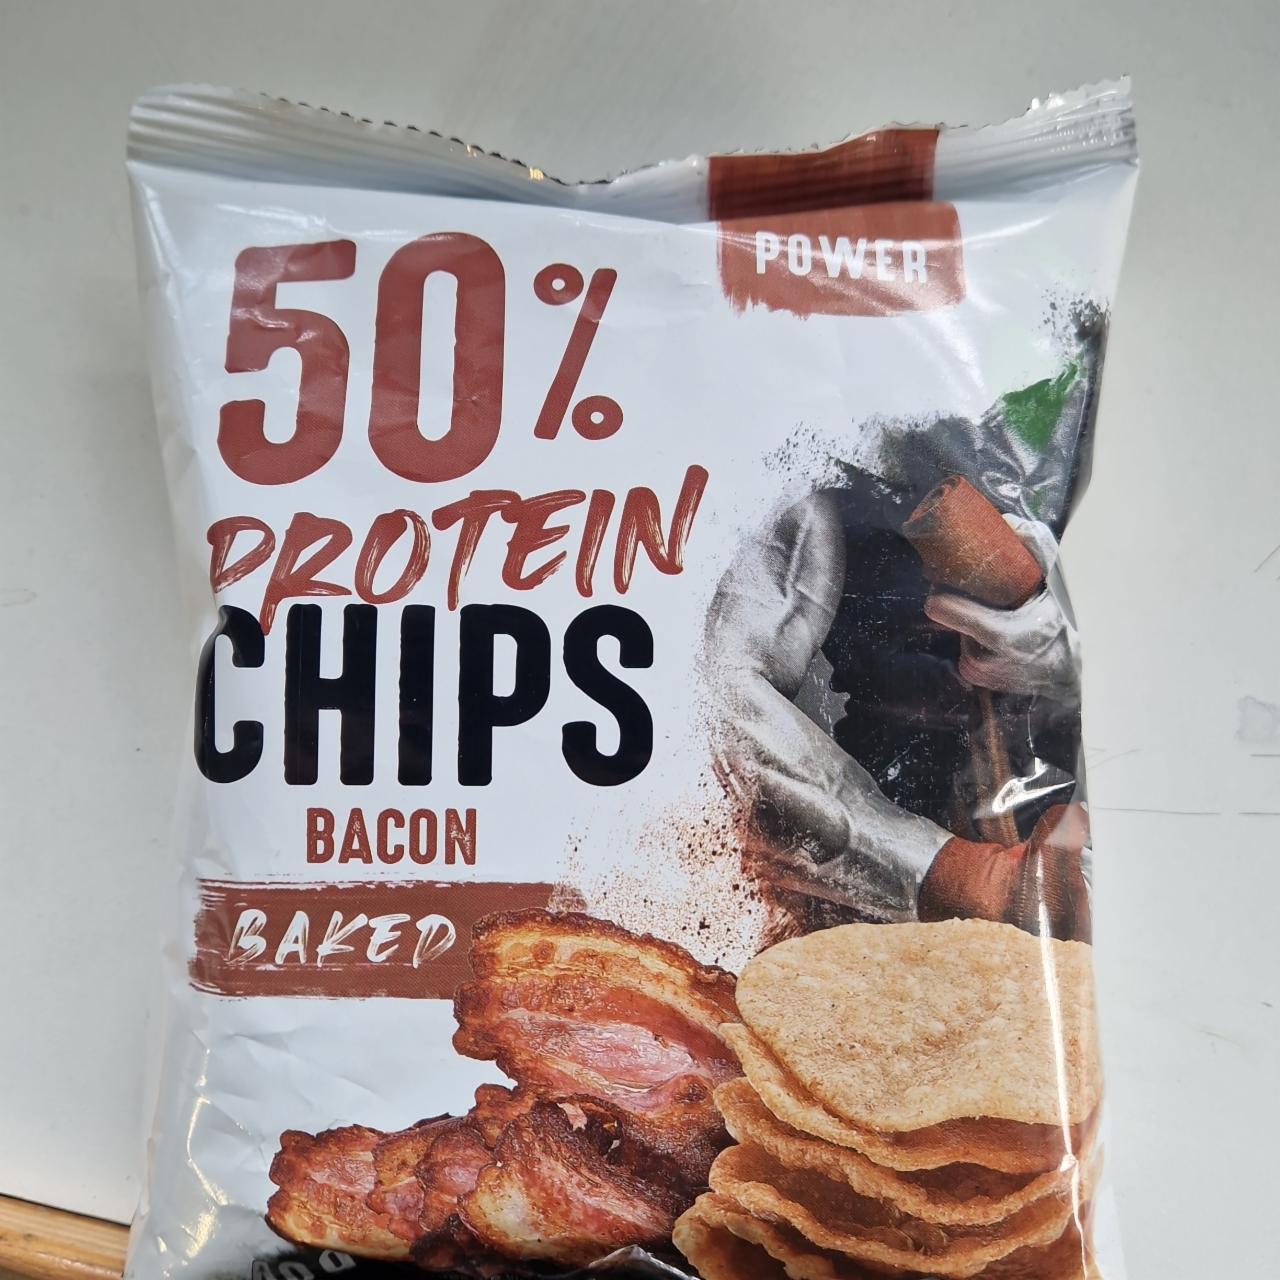 Képek - 50% protein Chips Bacon baked Power